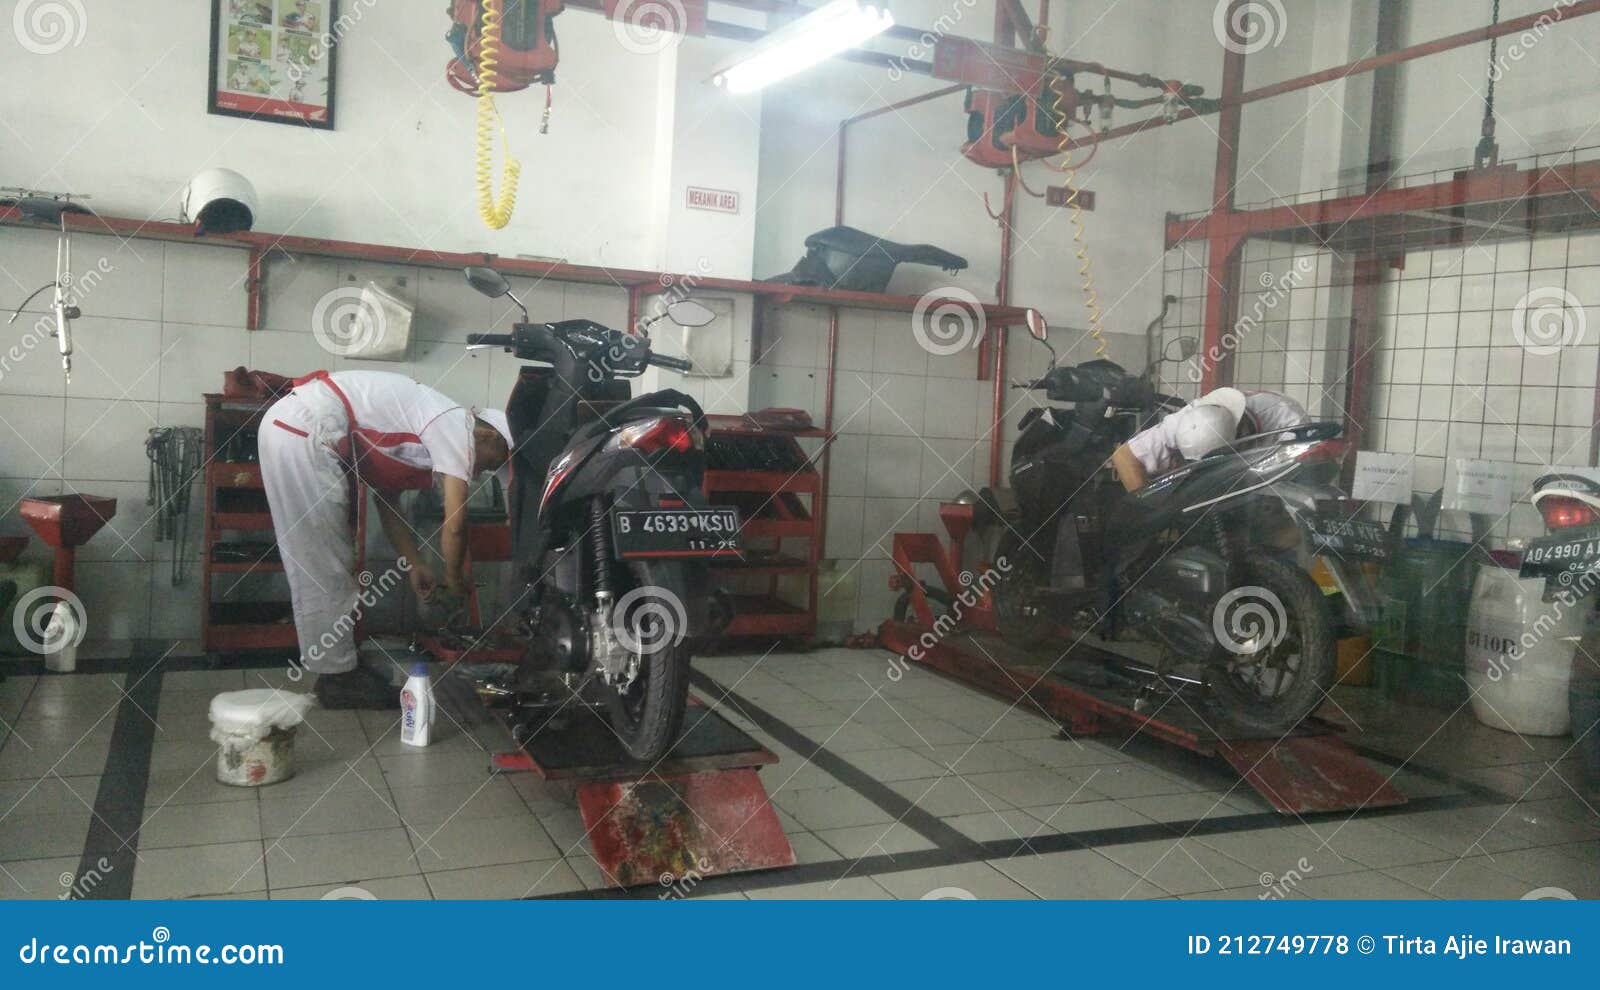 Jakarta Indonesia March 5 2021 Motorcycle In Line On Service Center Bengkel Motor During Rush Hours Editorial Stock Photo Image Of Maintenance Automobile 212749778